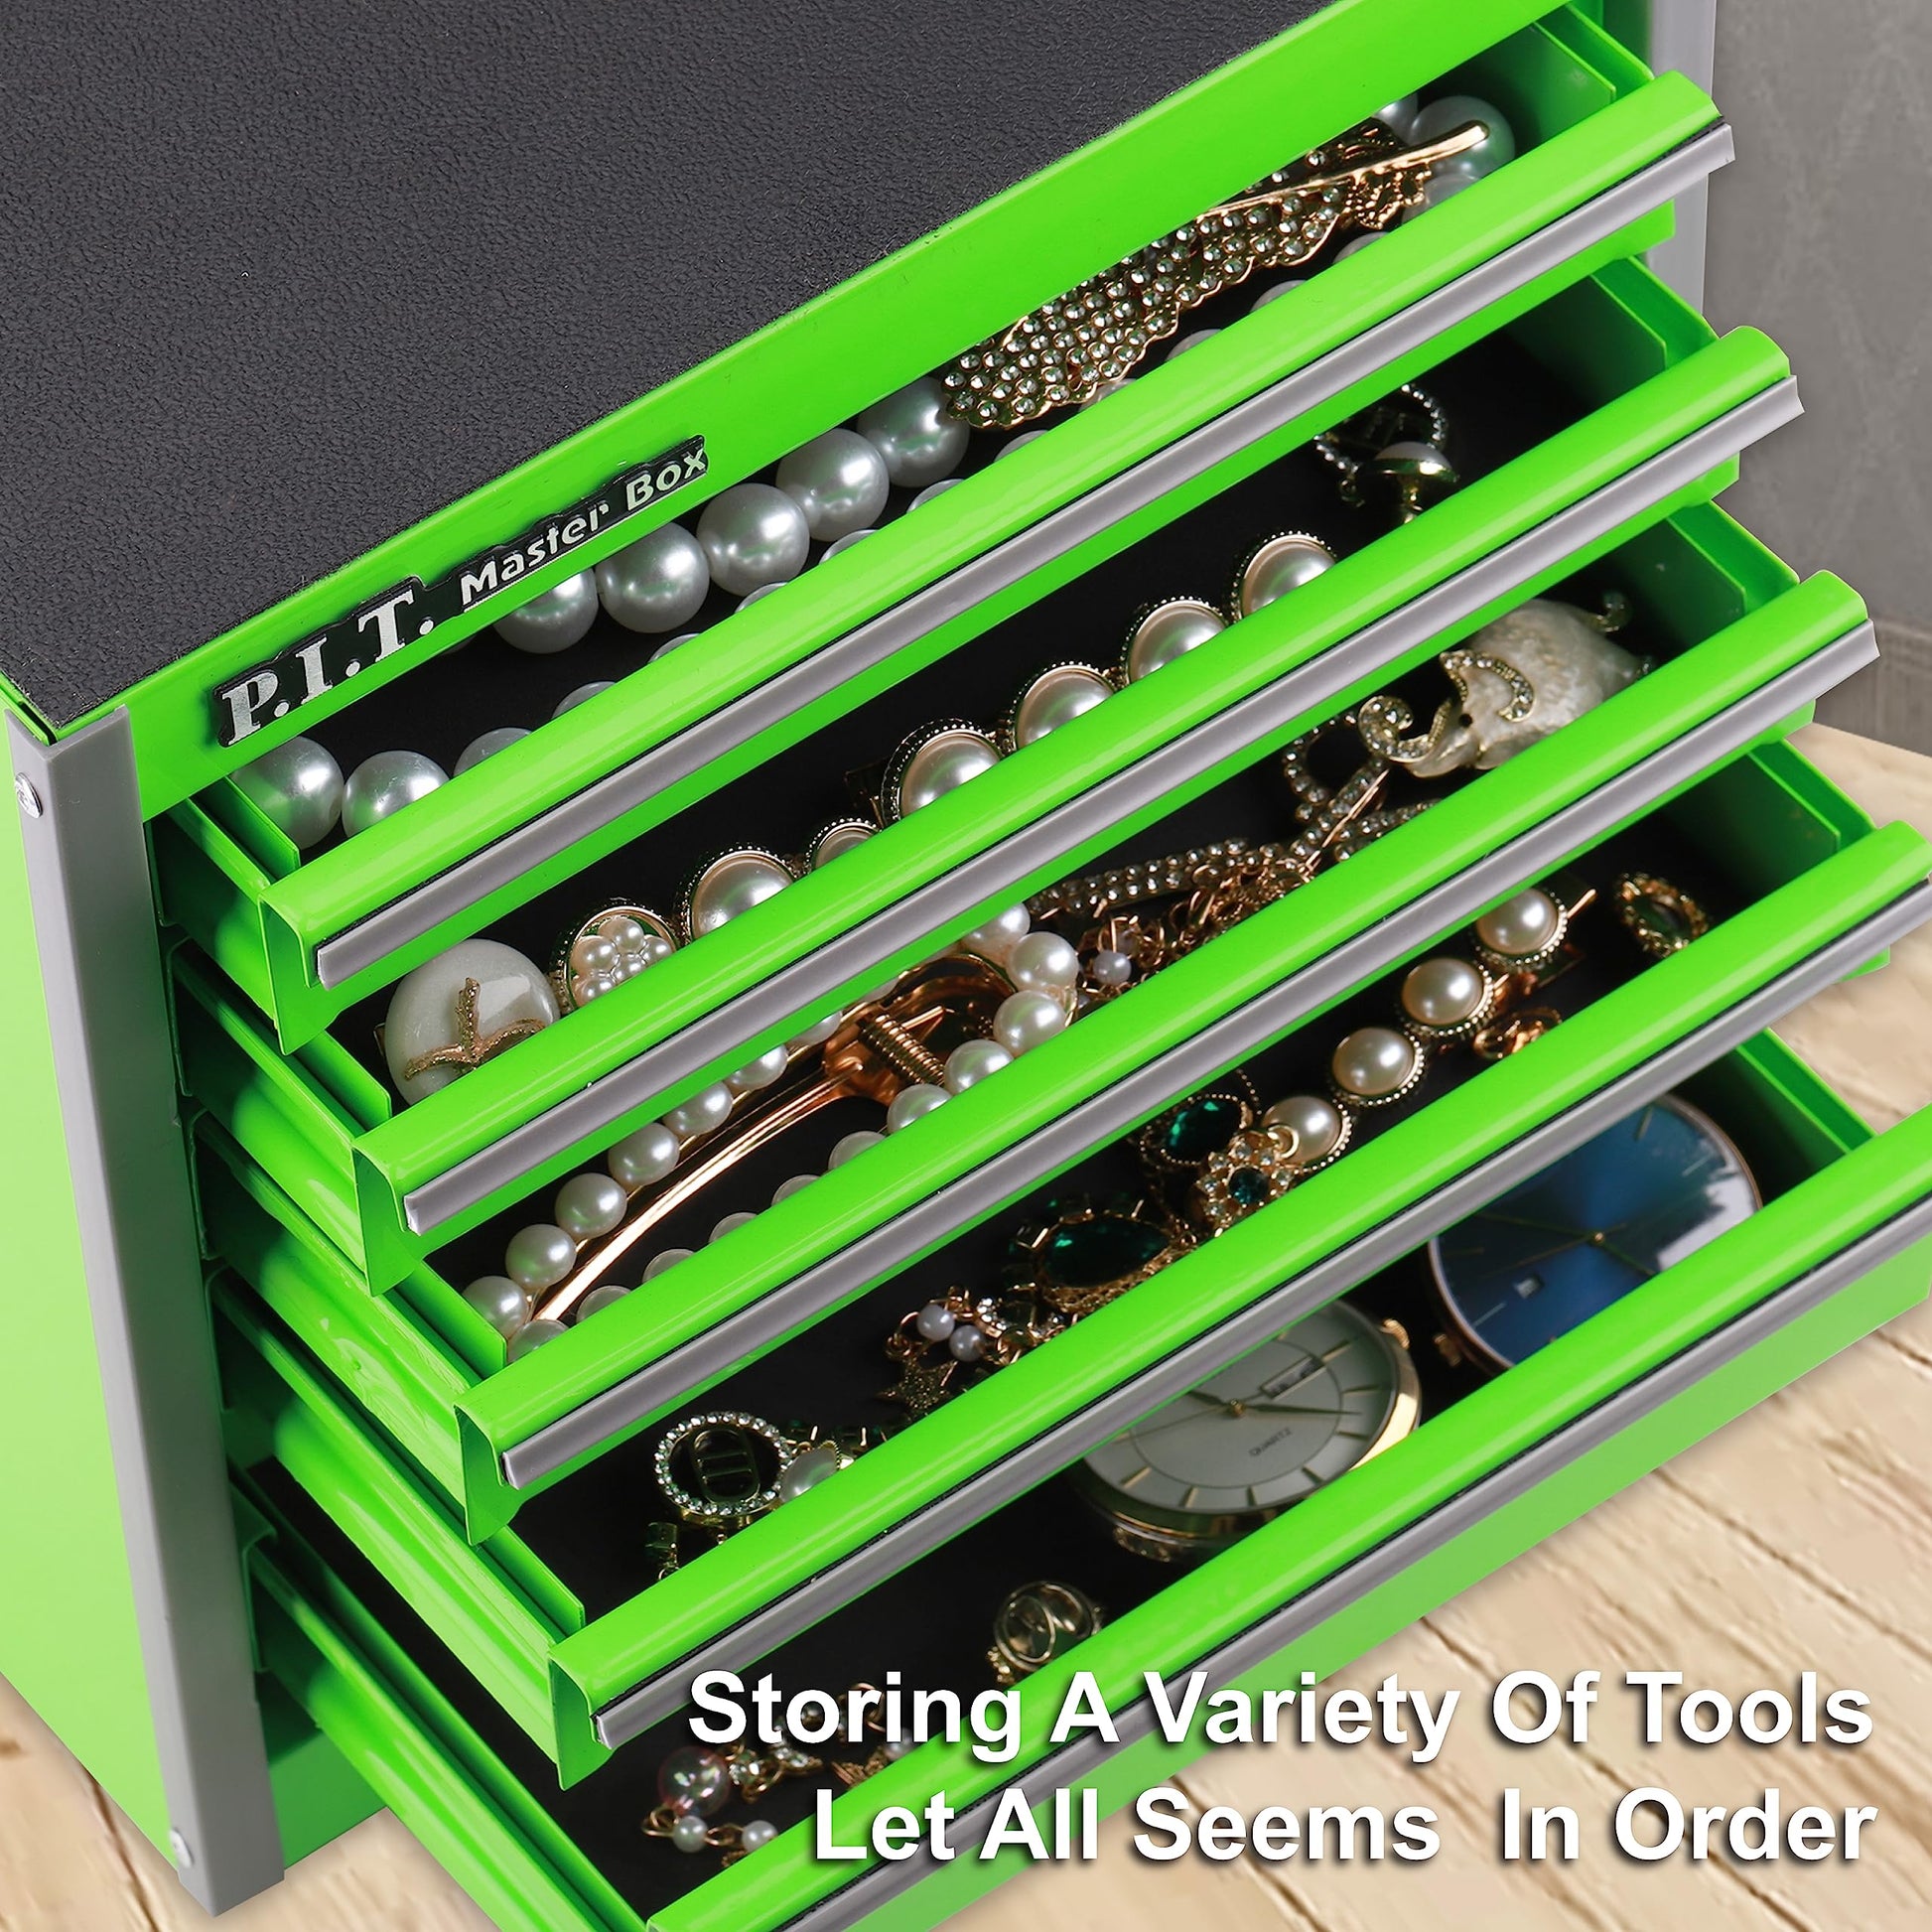 P.I.T. Portable Five-Drawer Steel Tool Box, Green Hand Carry Tool